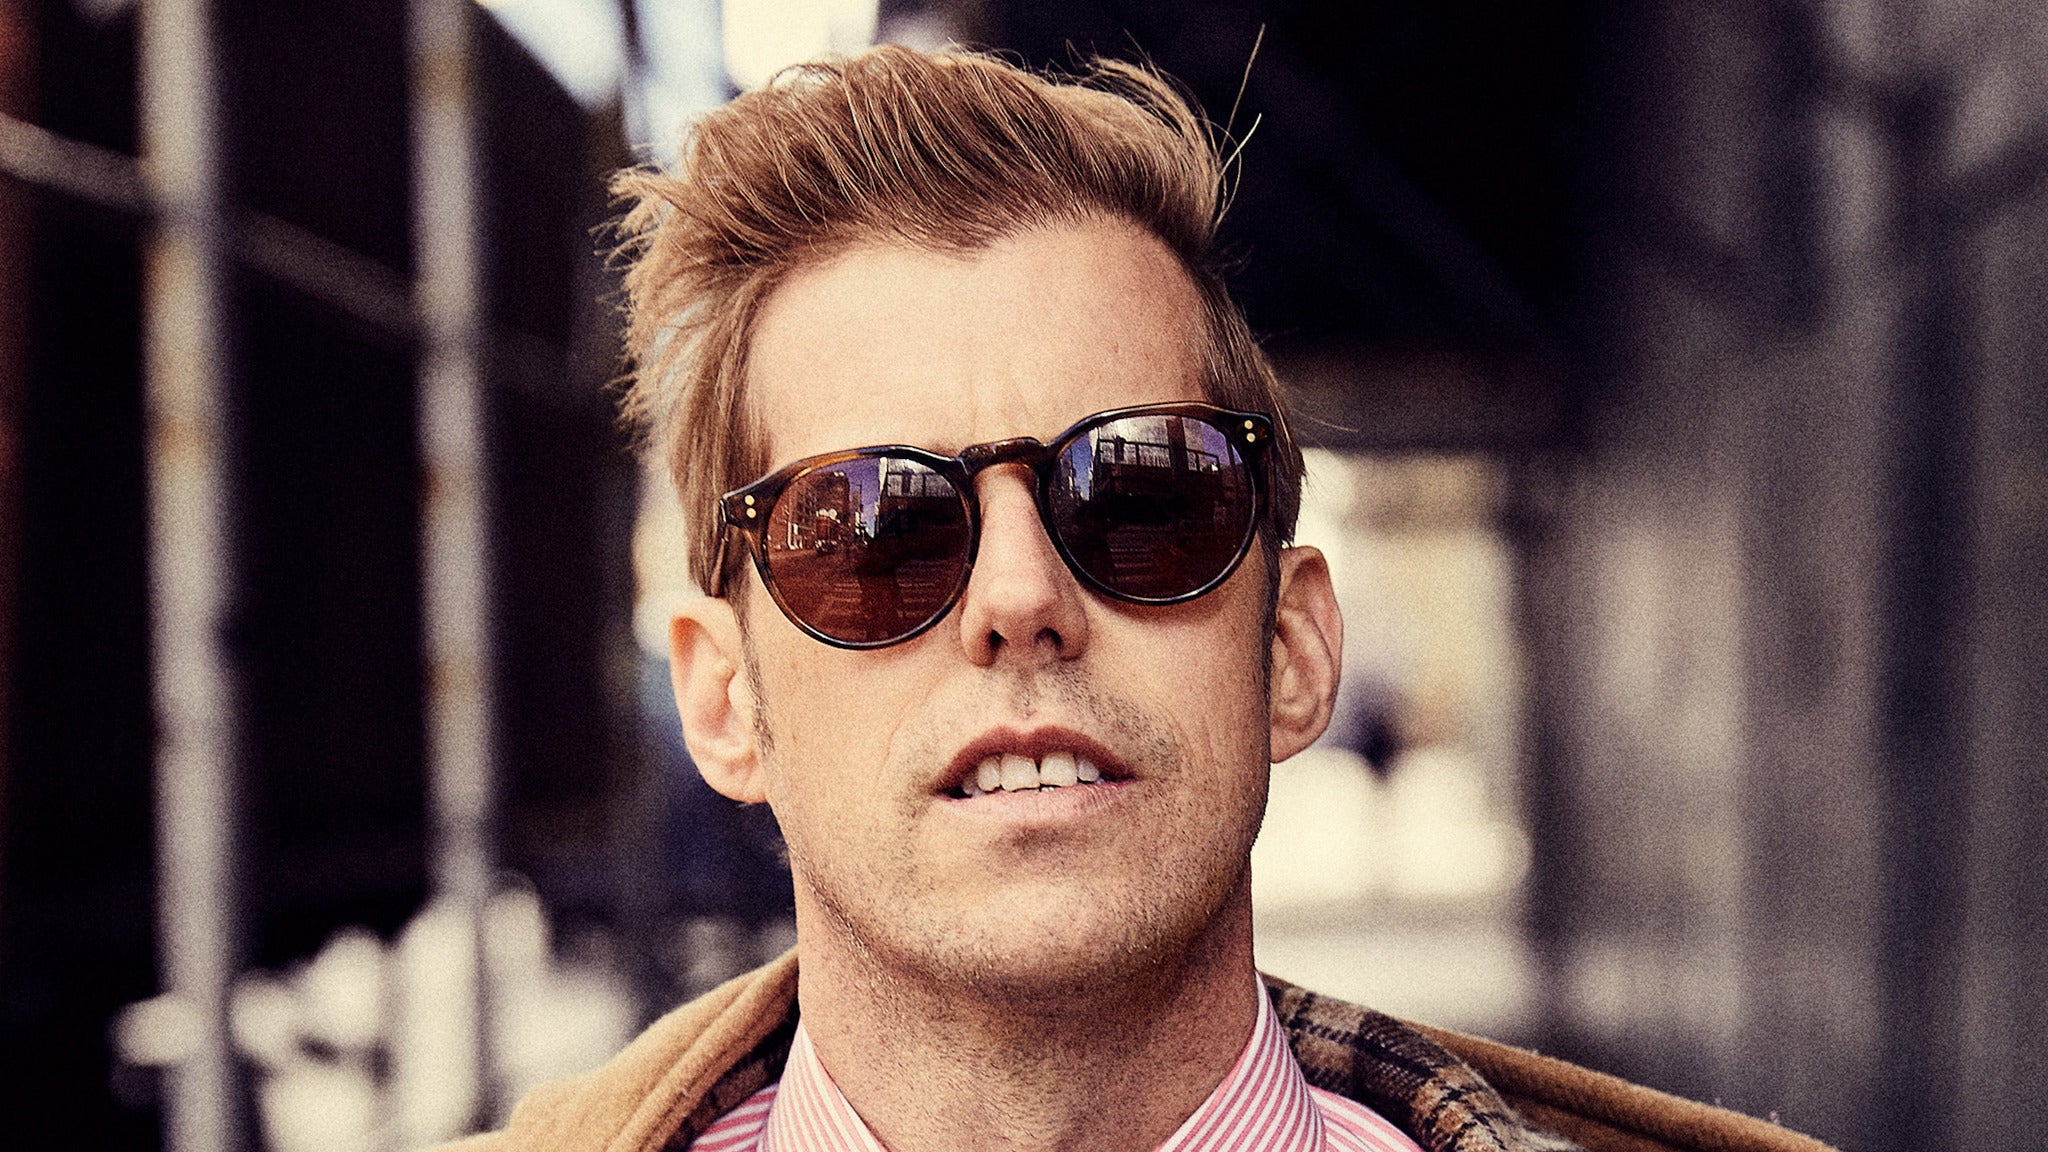 Andrew McMahon in the Wilderness in Seattle promo photo for Fanclub presale offer code